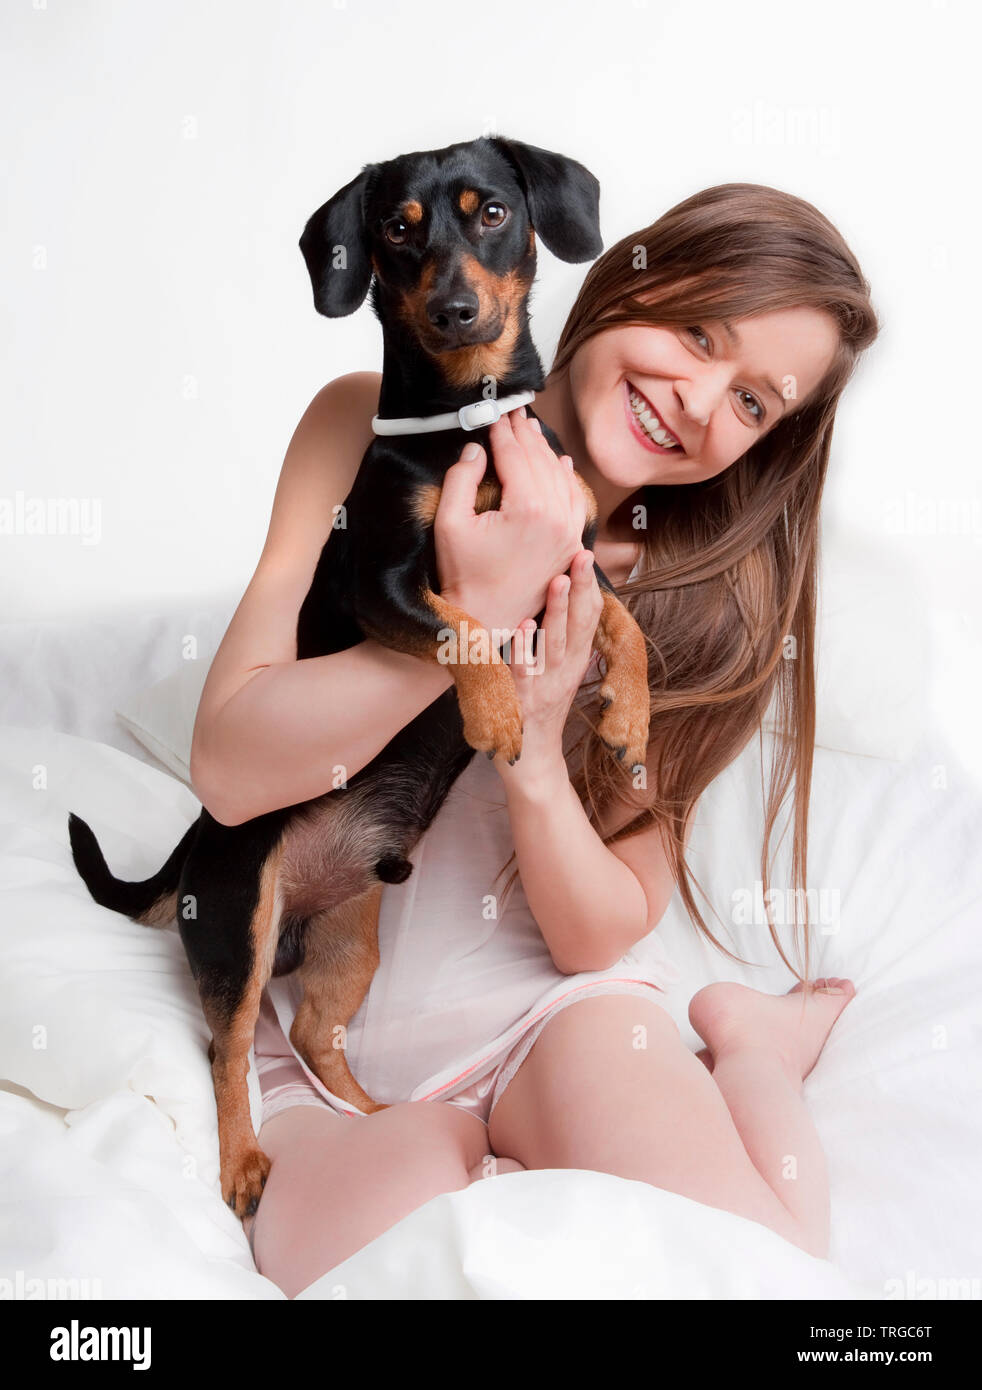 Woman in bed holding her dog. Stock Photo